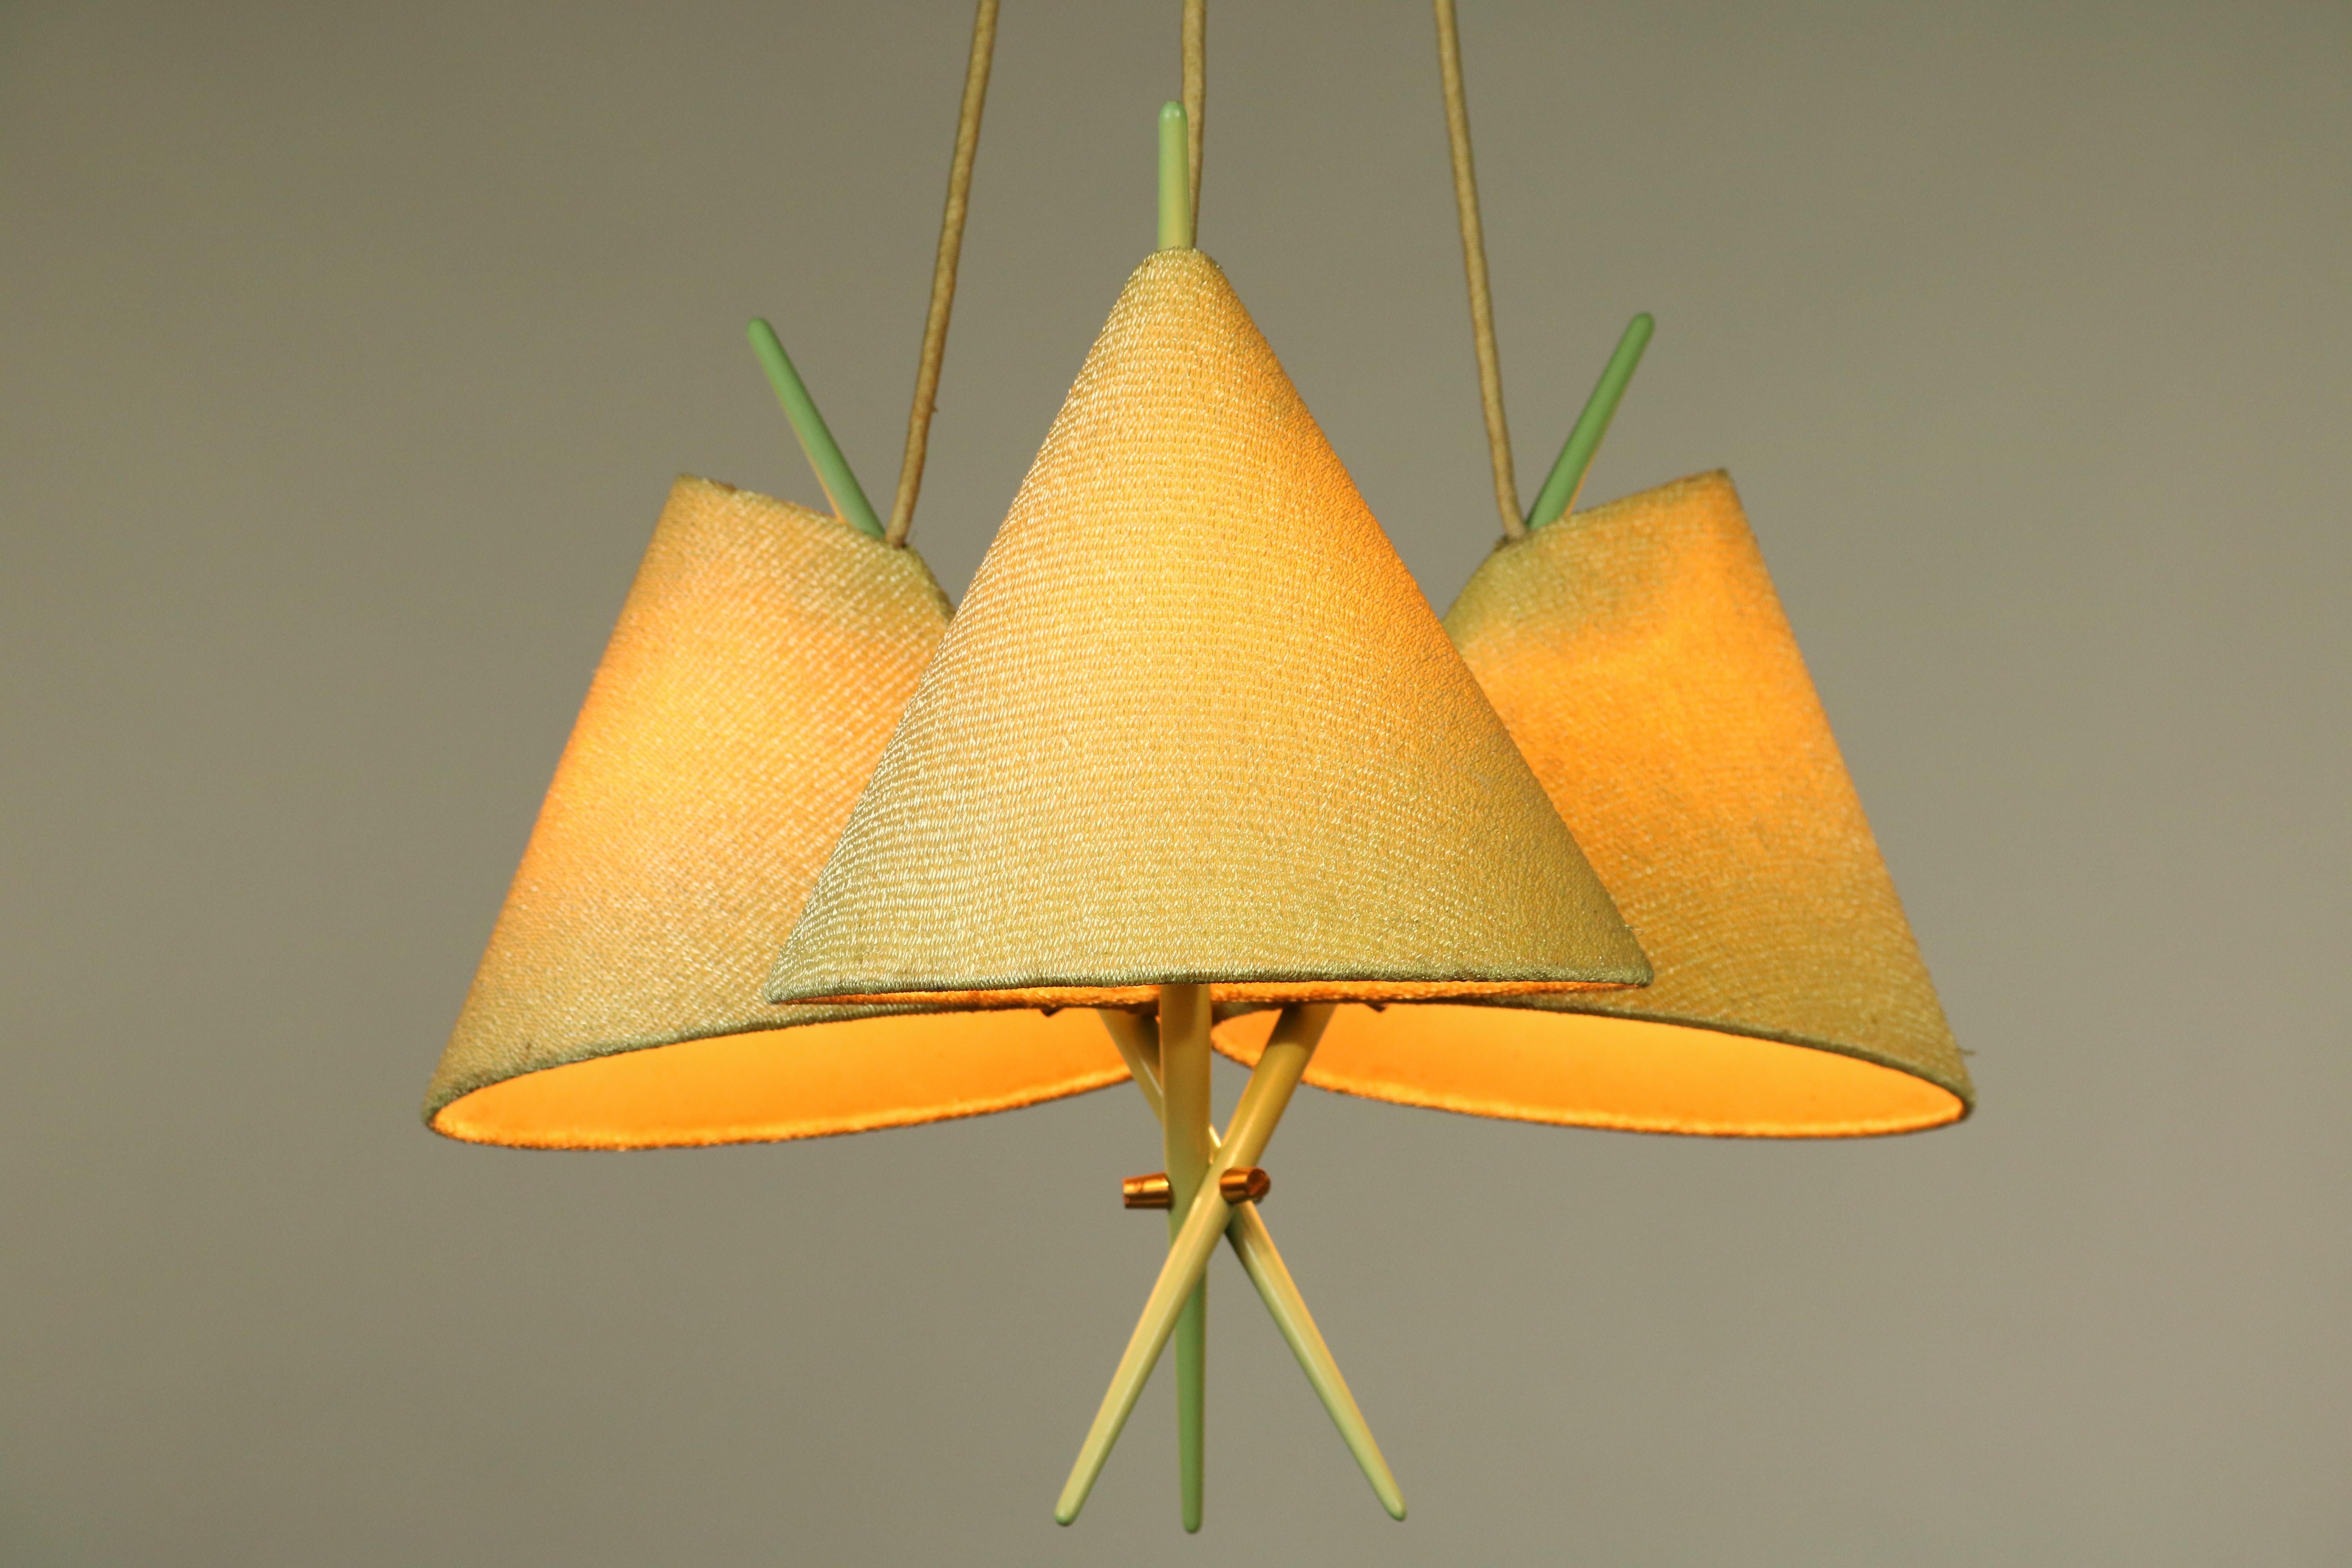 Rare 1950s Rupert Nikoll pendant lamp
the design is reminiscent of chopsticks (pastel green wood) with Chinese hat-lampshades,
as was fashionable in Europe 1950s.

with E14 sockets the small Edison screw
Measures: Weight 800 gr / 1.8